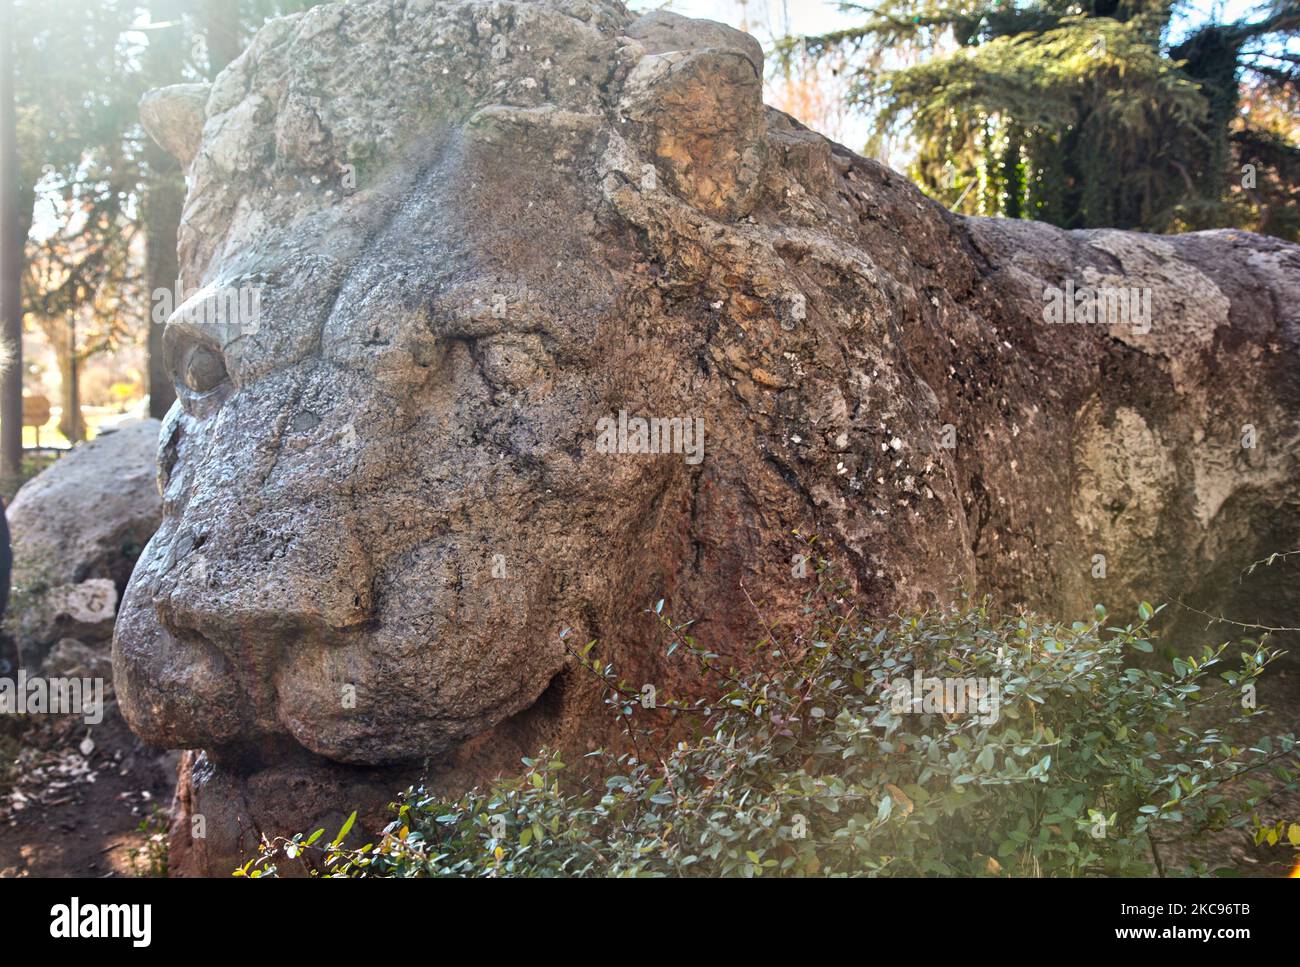 Lion statue at the Parc La Prairie in Ifrane, Morocco, Africa. The lion statue was carved in 1930 and measures 7 meters long 1.5 meters wide and 2 meters high. (Photo by Creative Touch Imaging Ltd./NurPhoto) Stock Photo